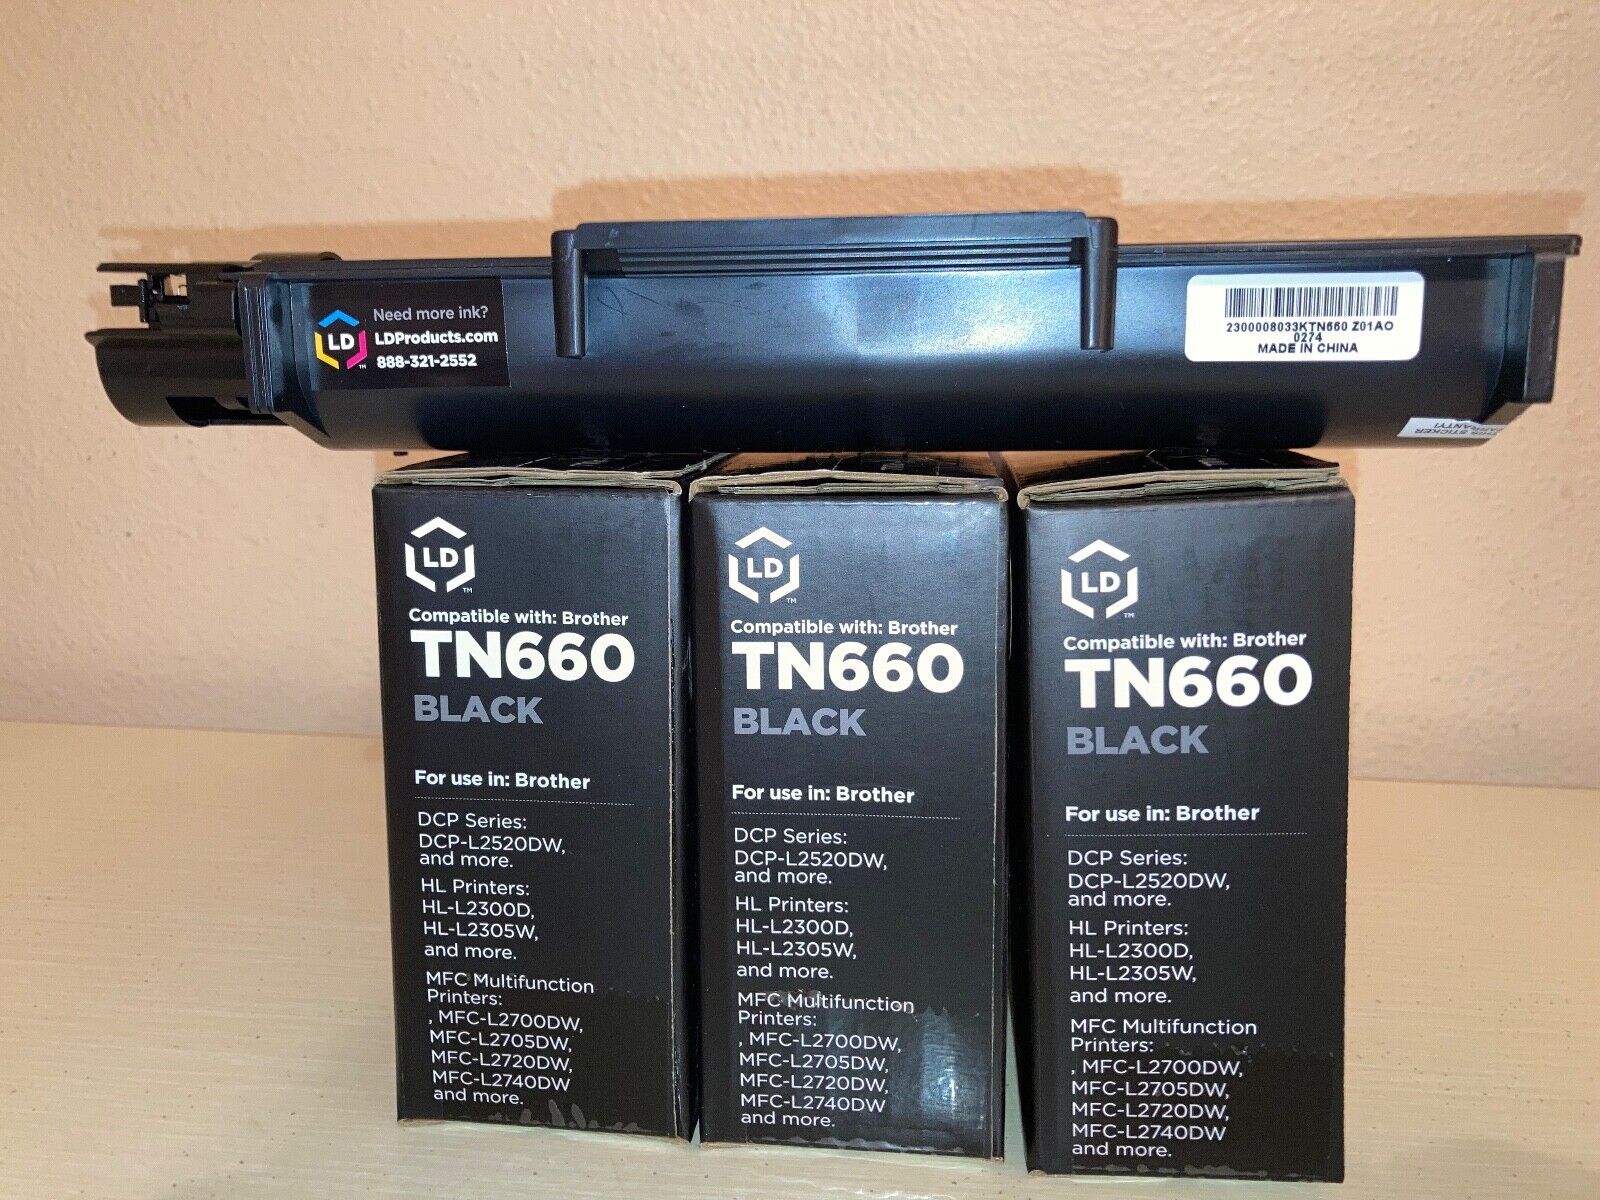 LD Products Brother-compatible TN660 toner cartridges (lot of 3 NEW + 1 opened)